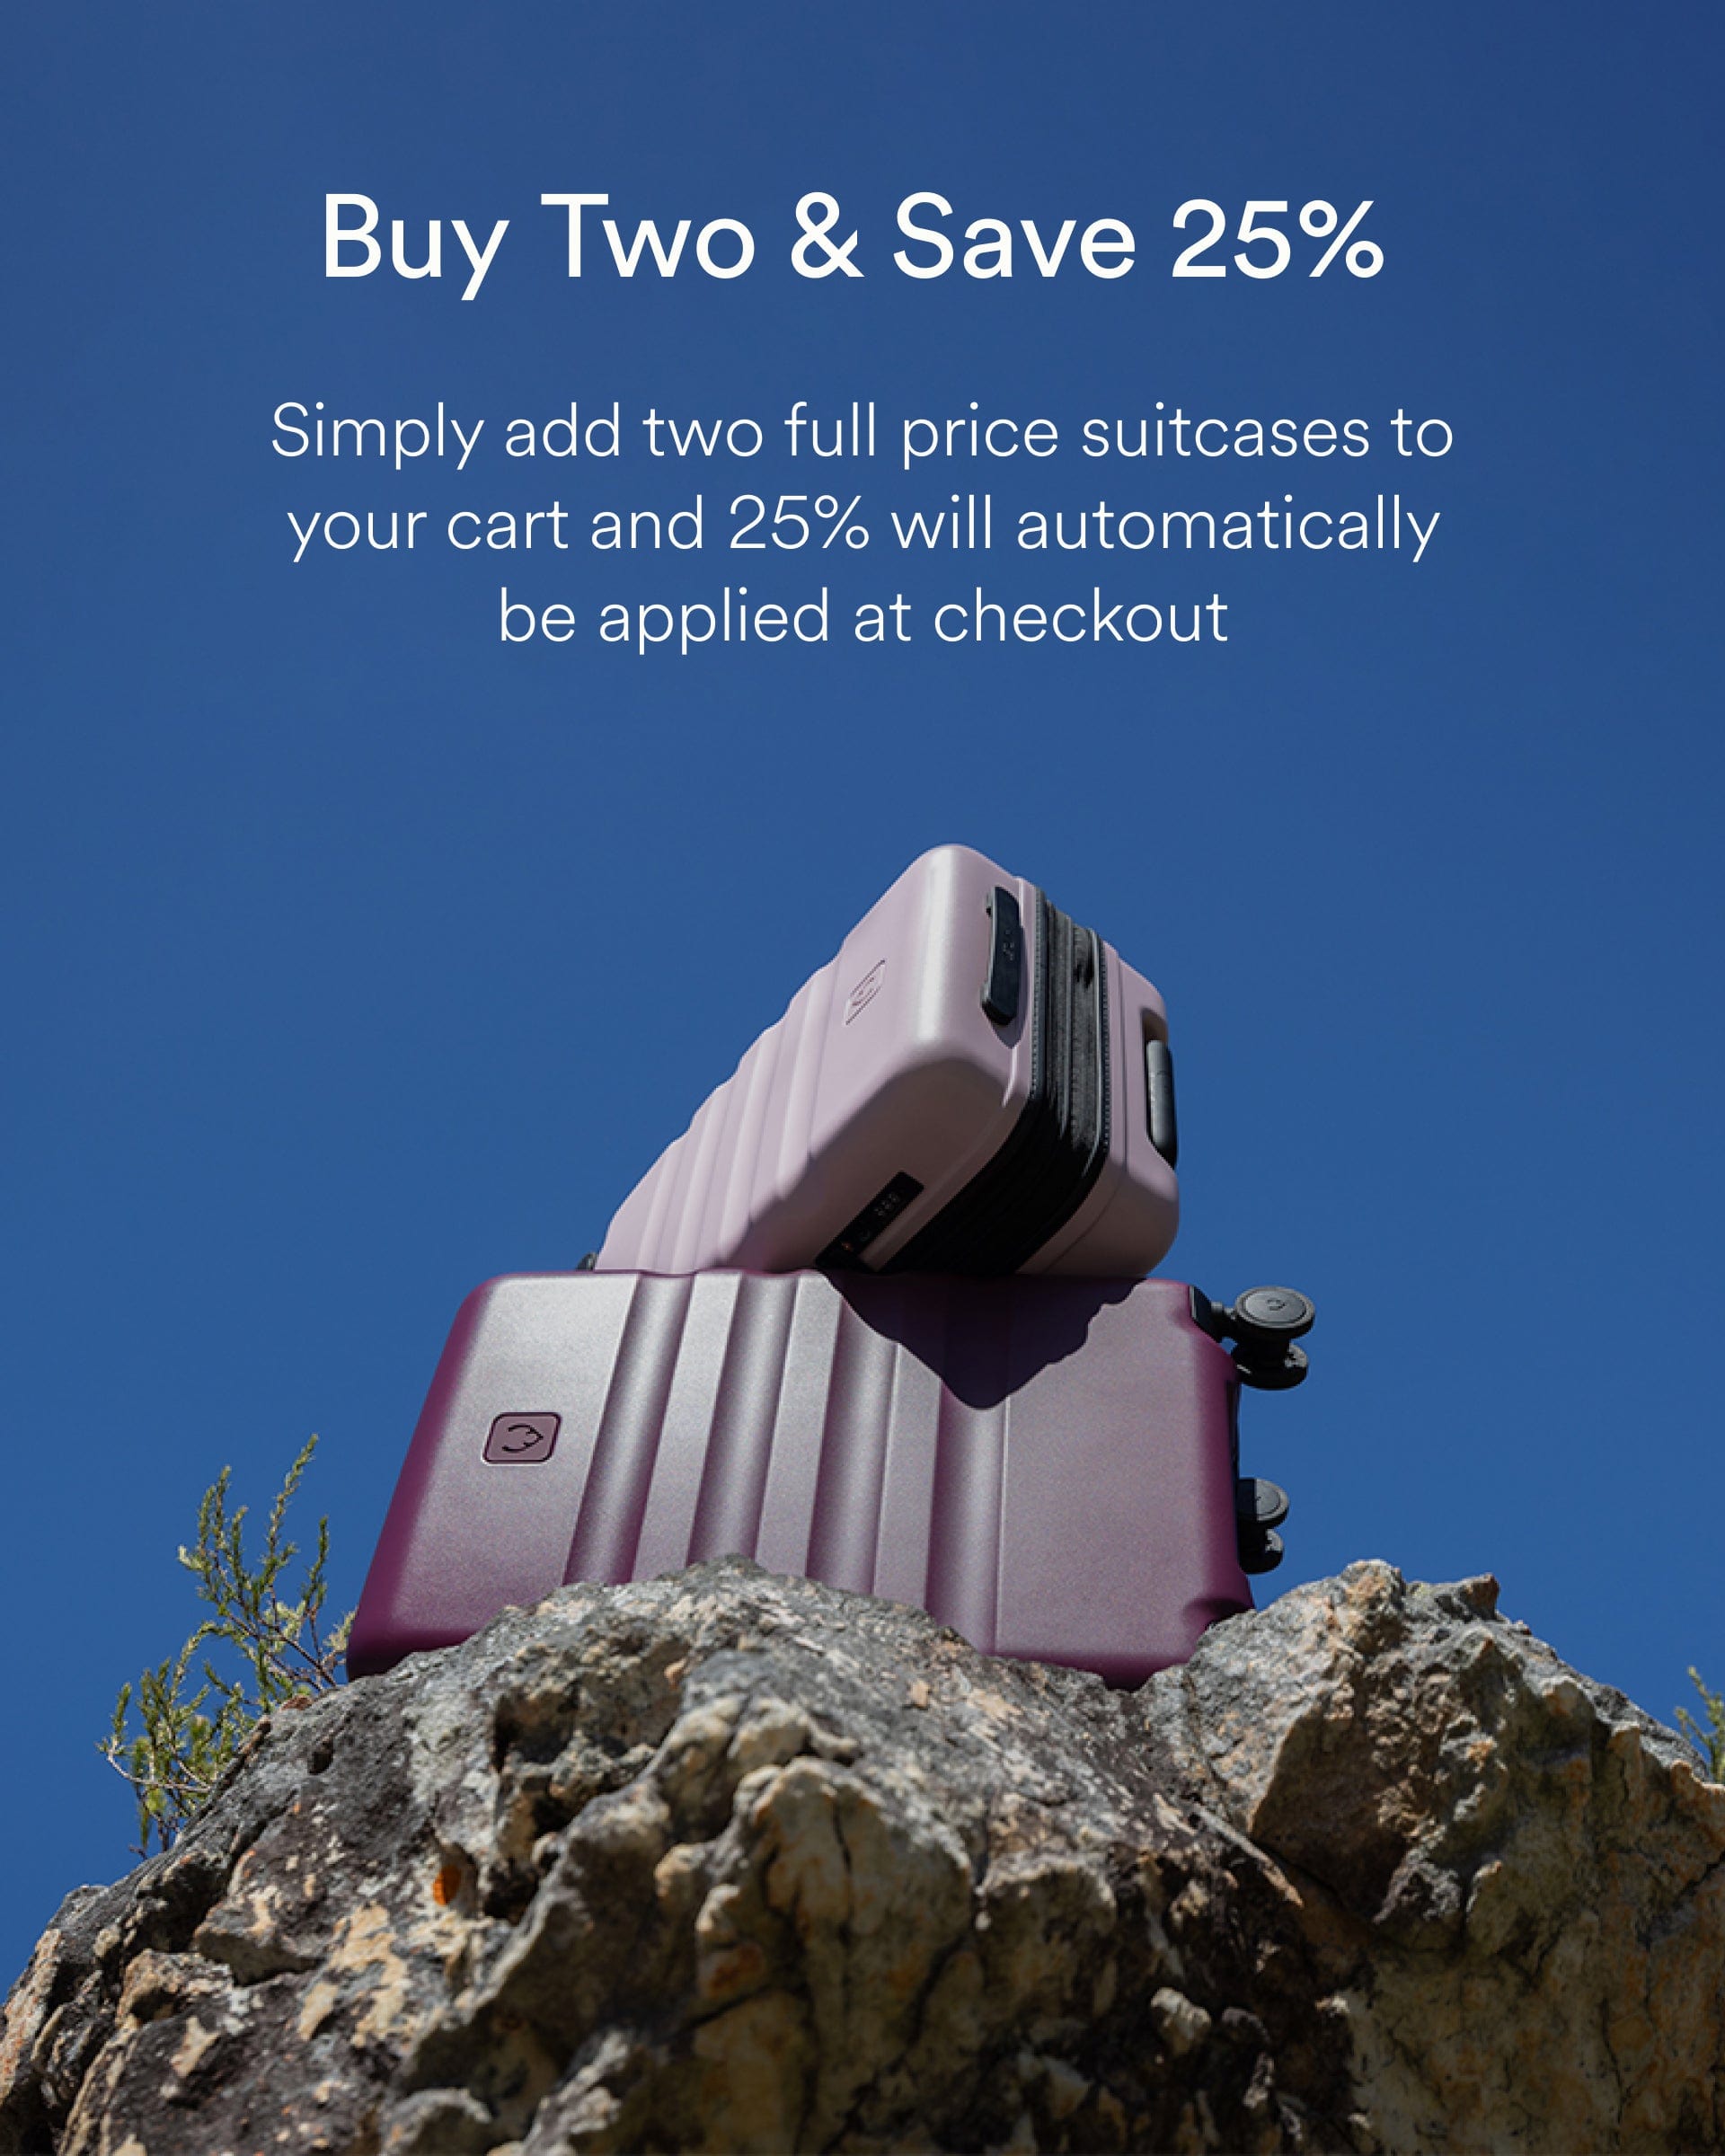 Antler UK Luggage -  Buy 2 and Save 25% - featured